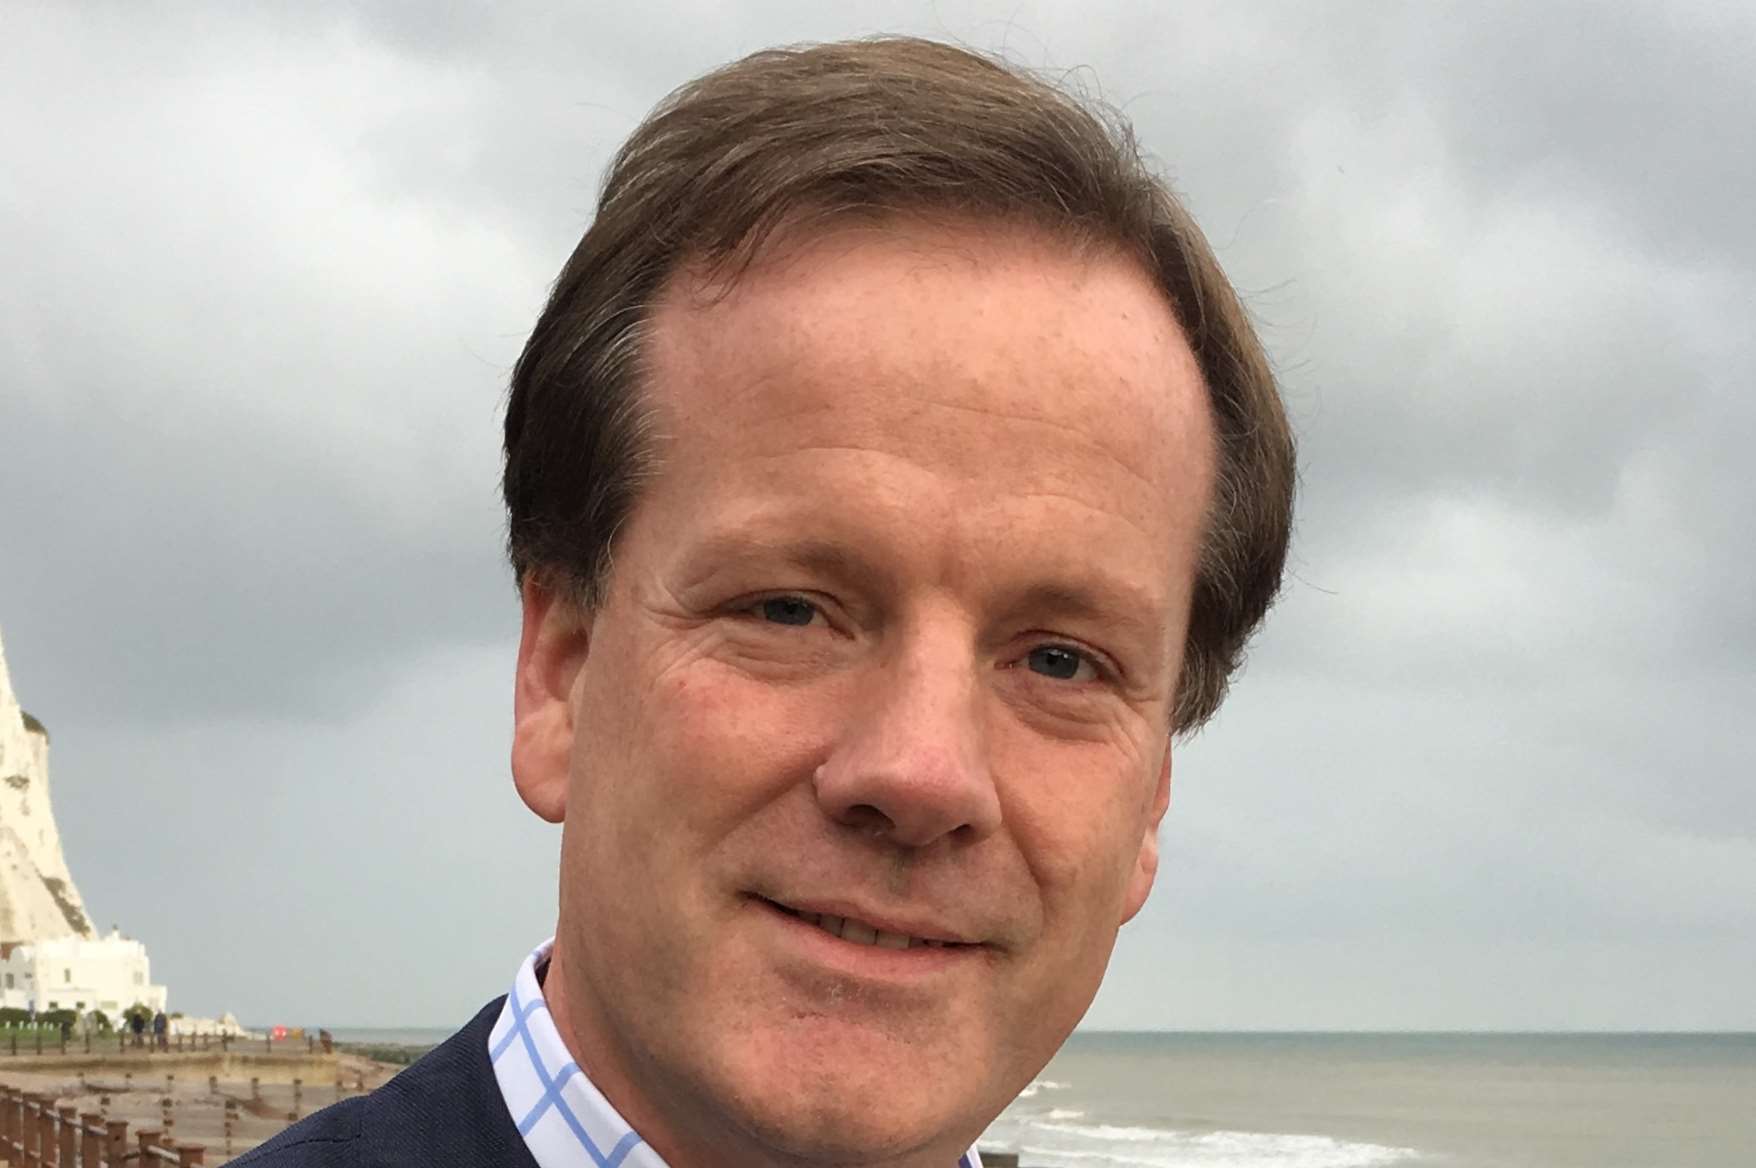 MP Charlie Elphicke says it is unfair for anyone to be in his position